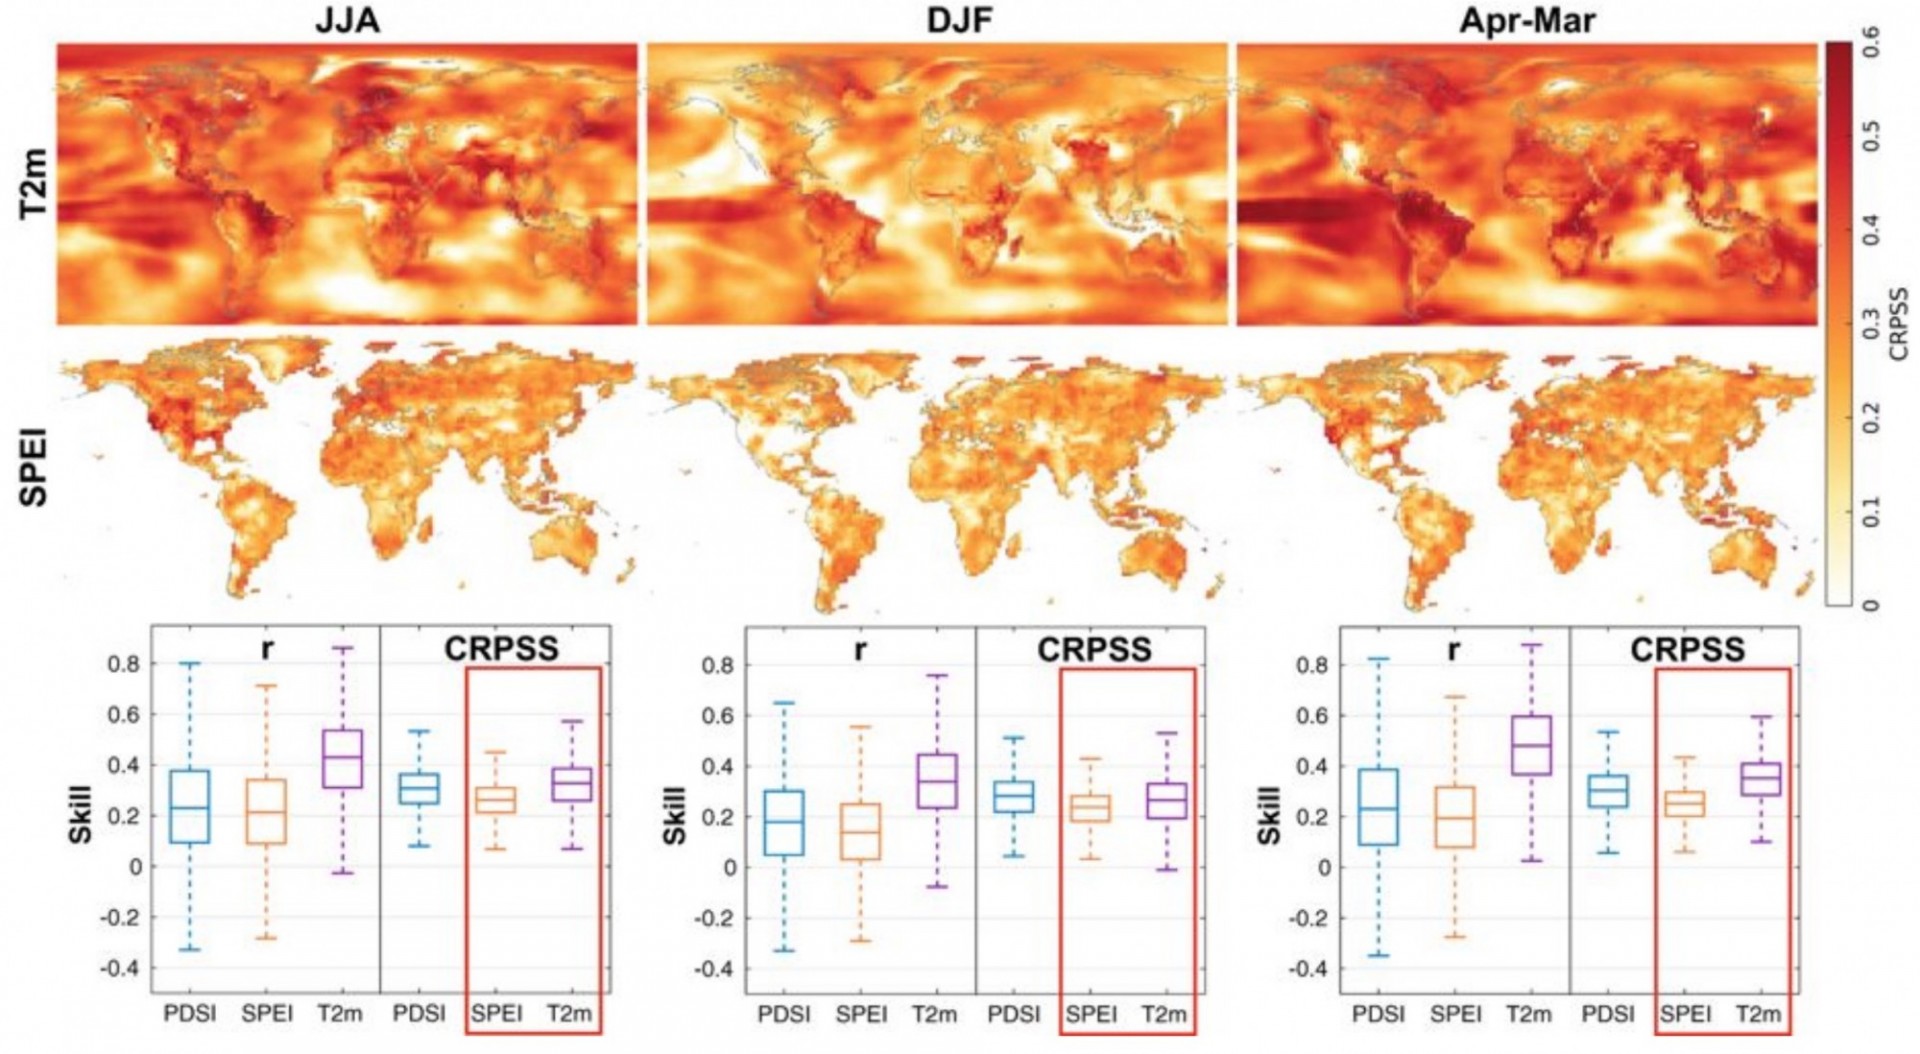 Skill assessment of the PHYDA shown globally for surface temperature and SPEI.